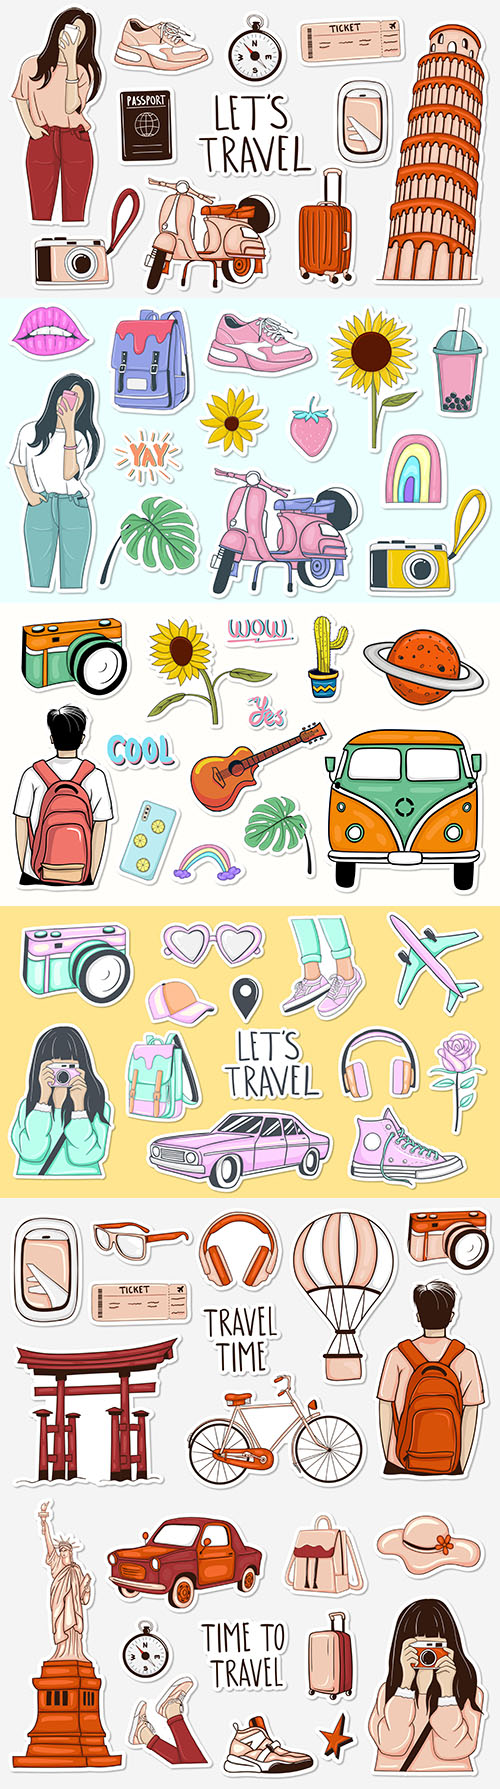 Tourism and recreation collection of colorful painted stickers
